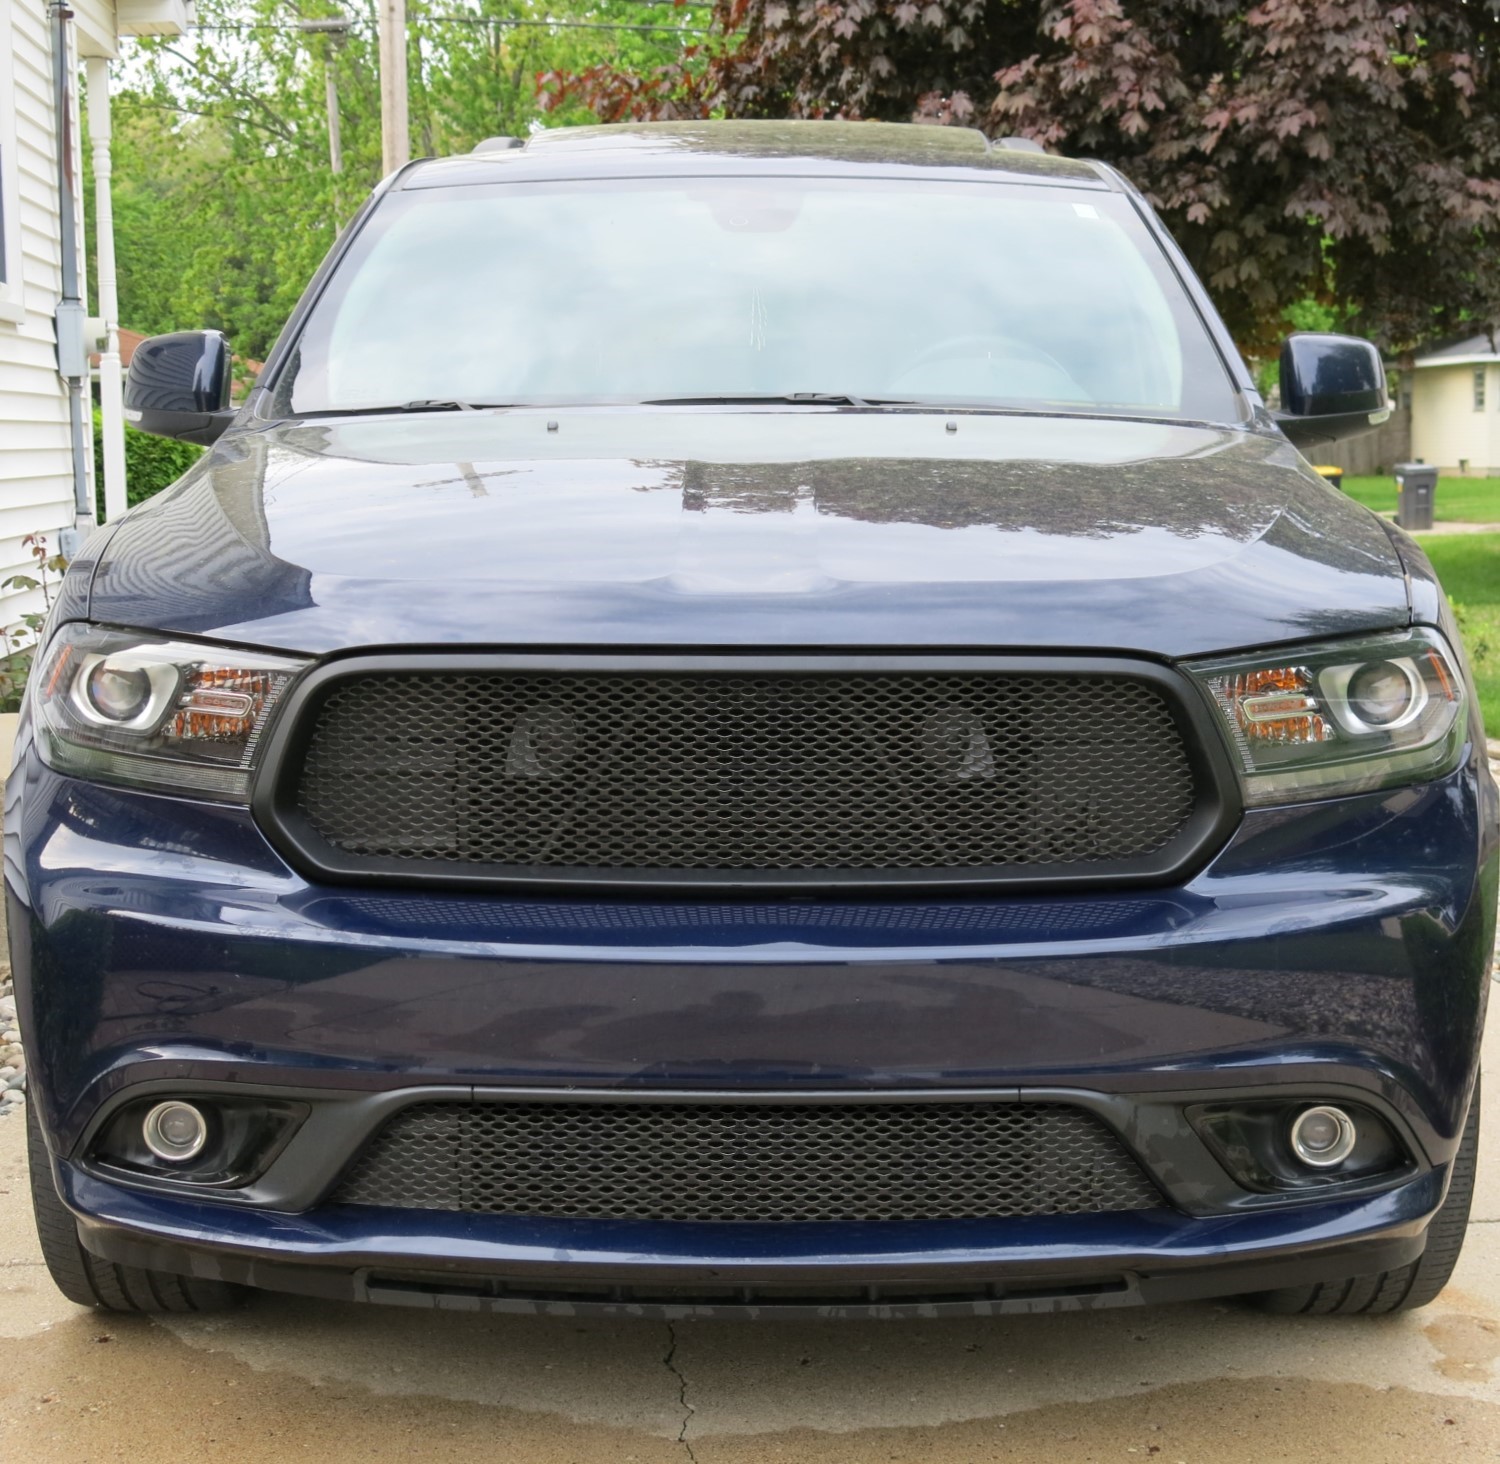 Complete Your Look with a Matching Lower Mesh Grille for the 2014+ Dodge Durango